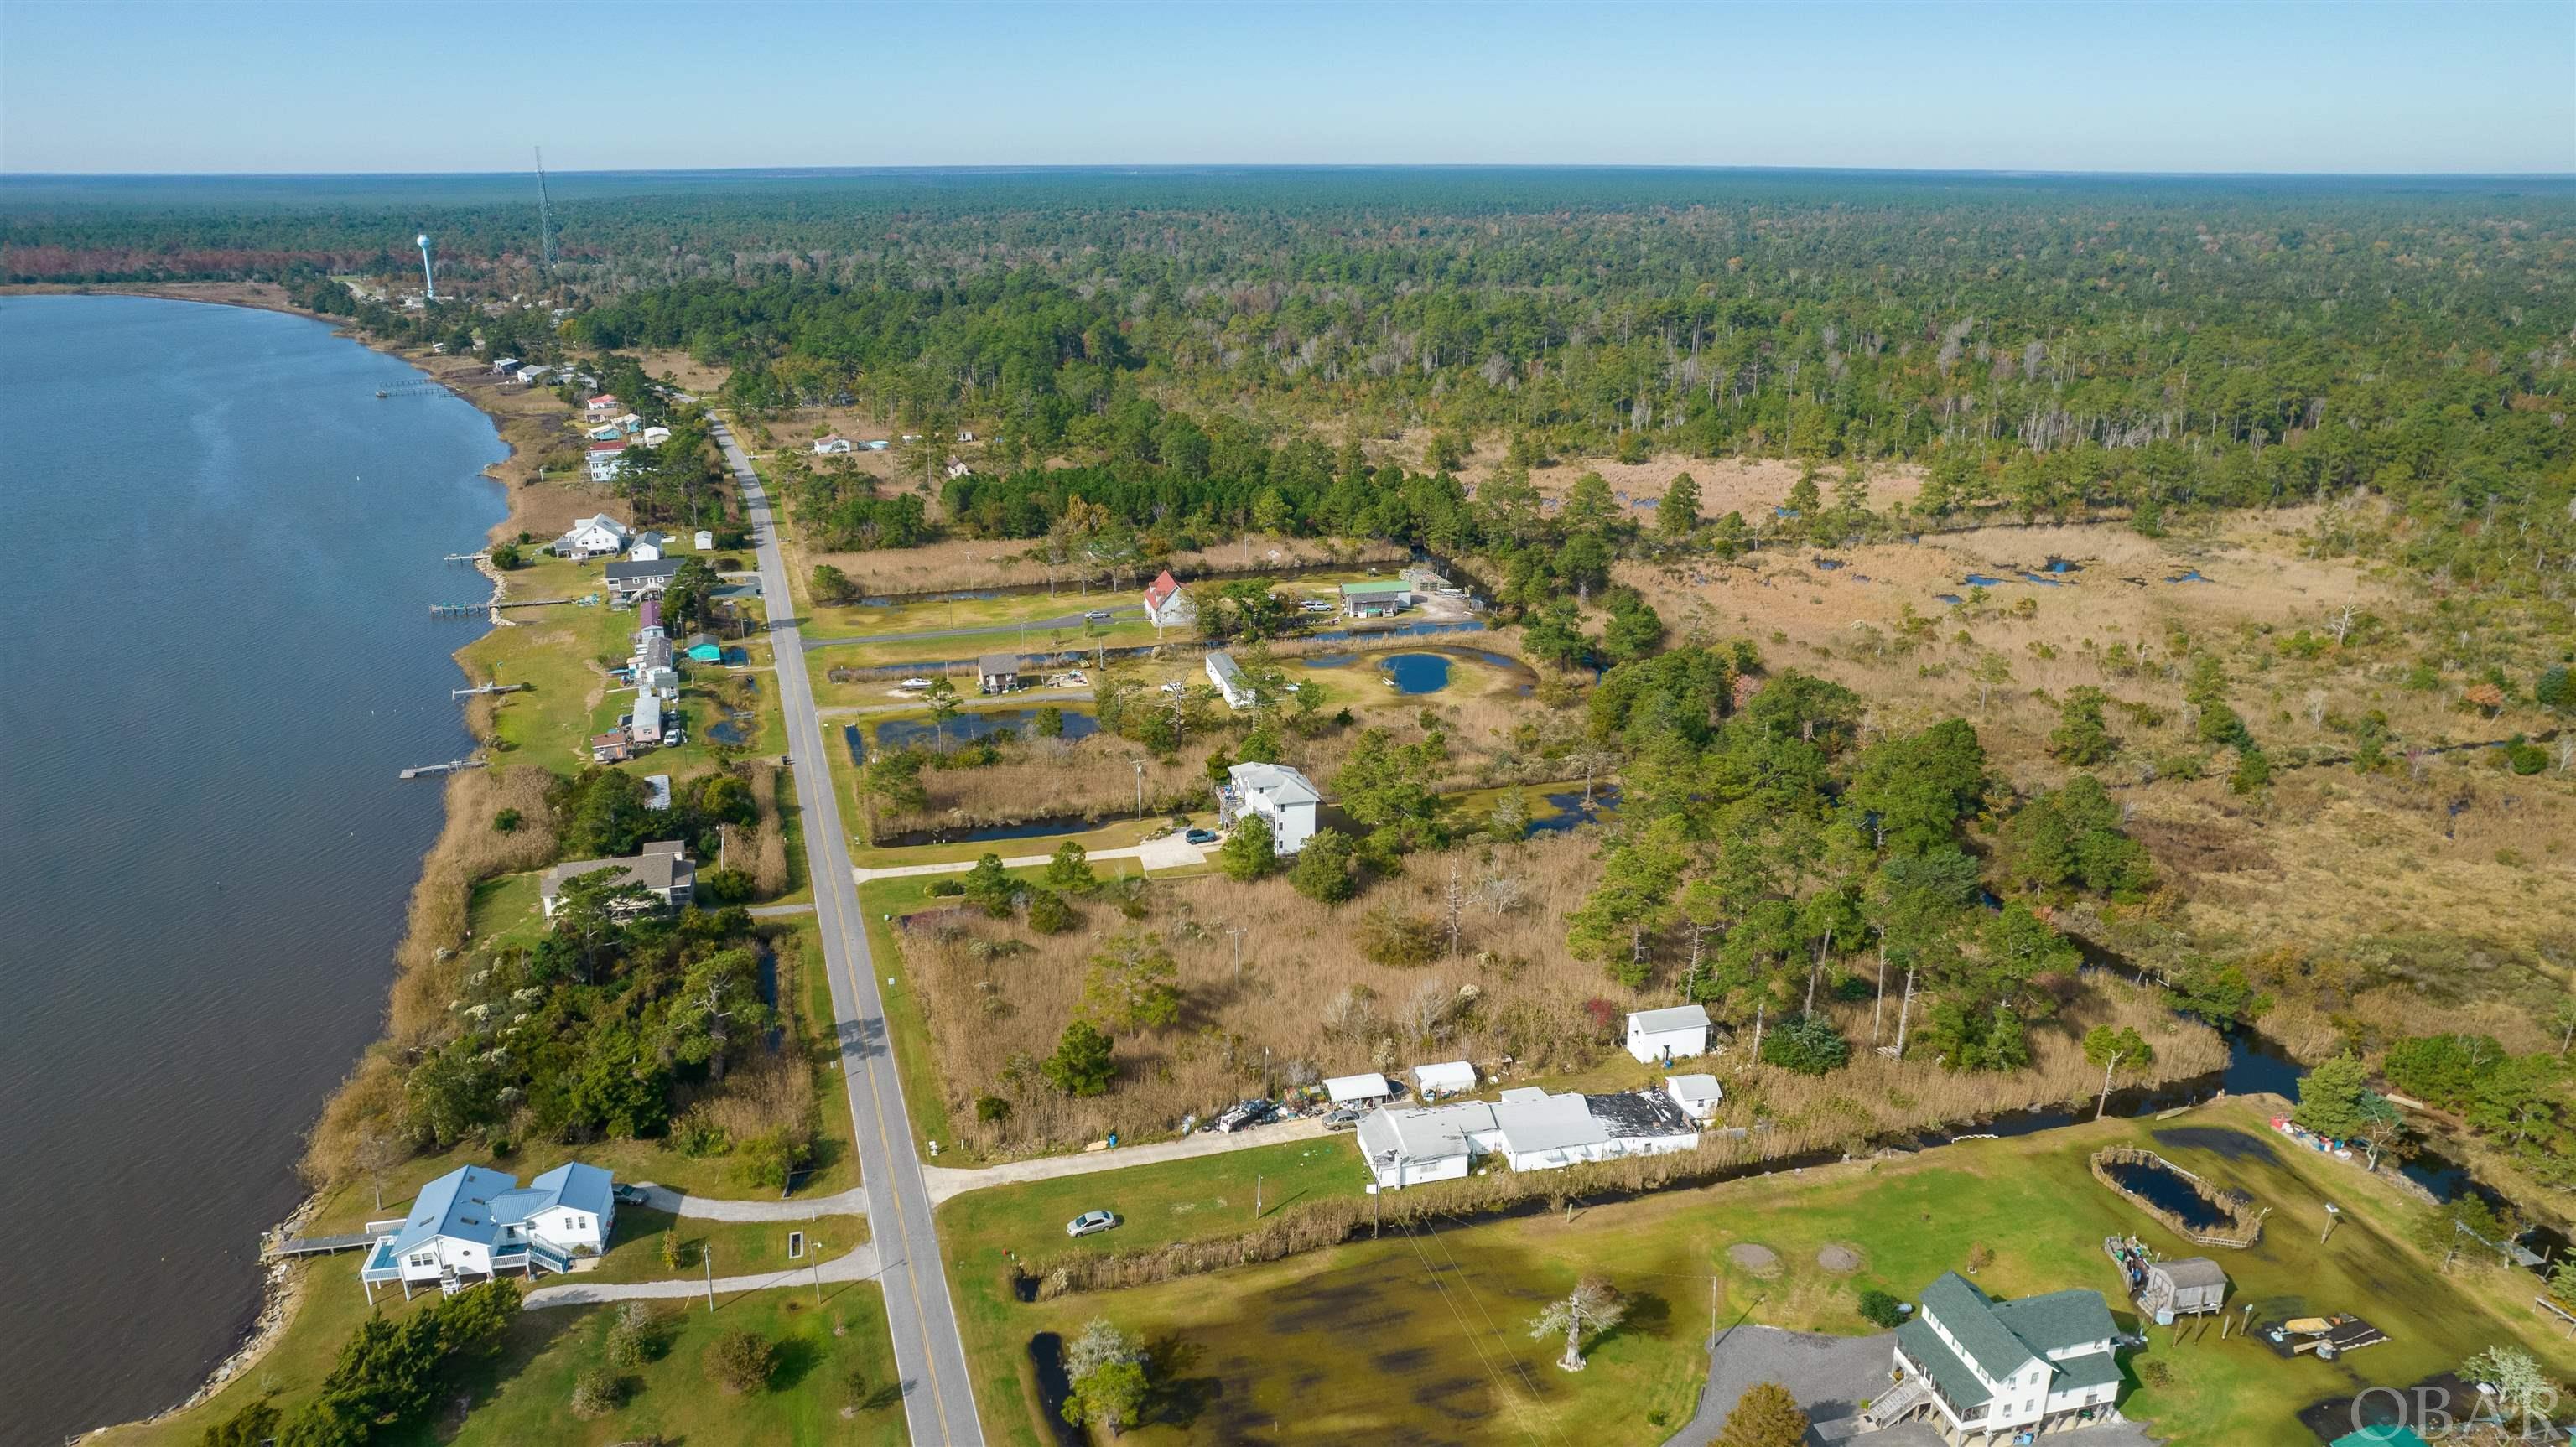 170 Bayview Drive, Stumpy Point, NC 27978, ,Lots/land,For sale,Bayview Drive,120842